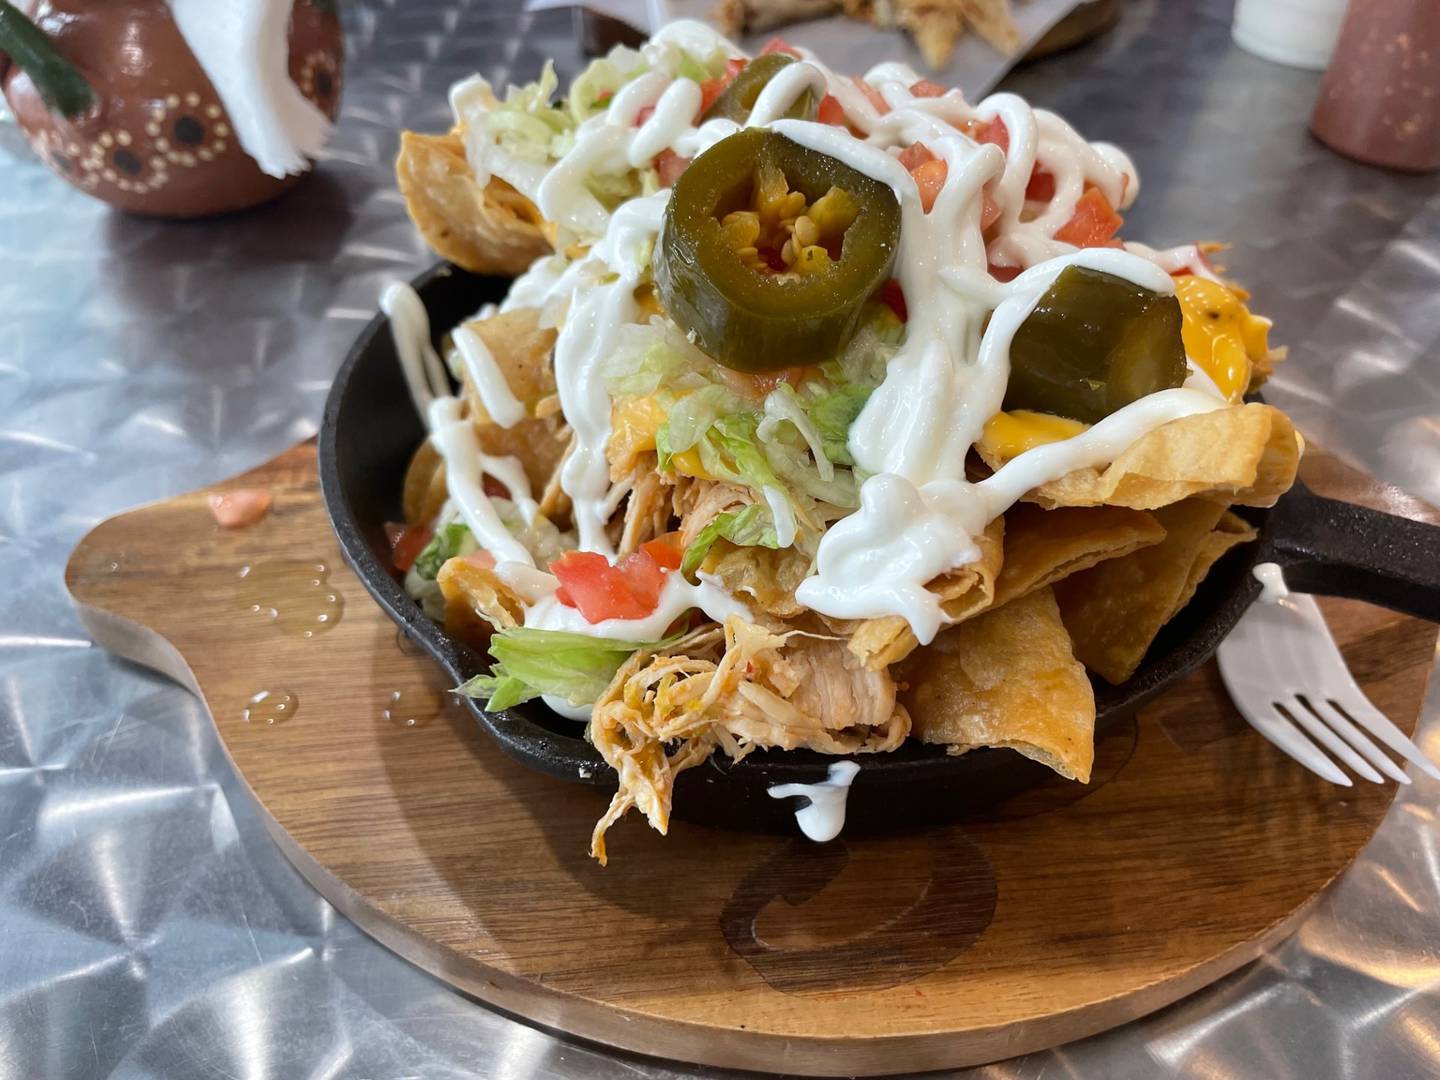 Loaded nachos from Marichuy’s Taqueria in Spring Valley. Served in a skillet, these nachos come with a choice of beef, pork, chicken or chorizo.